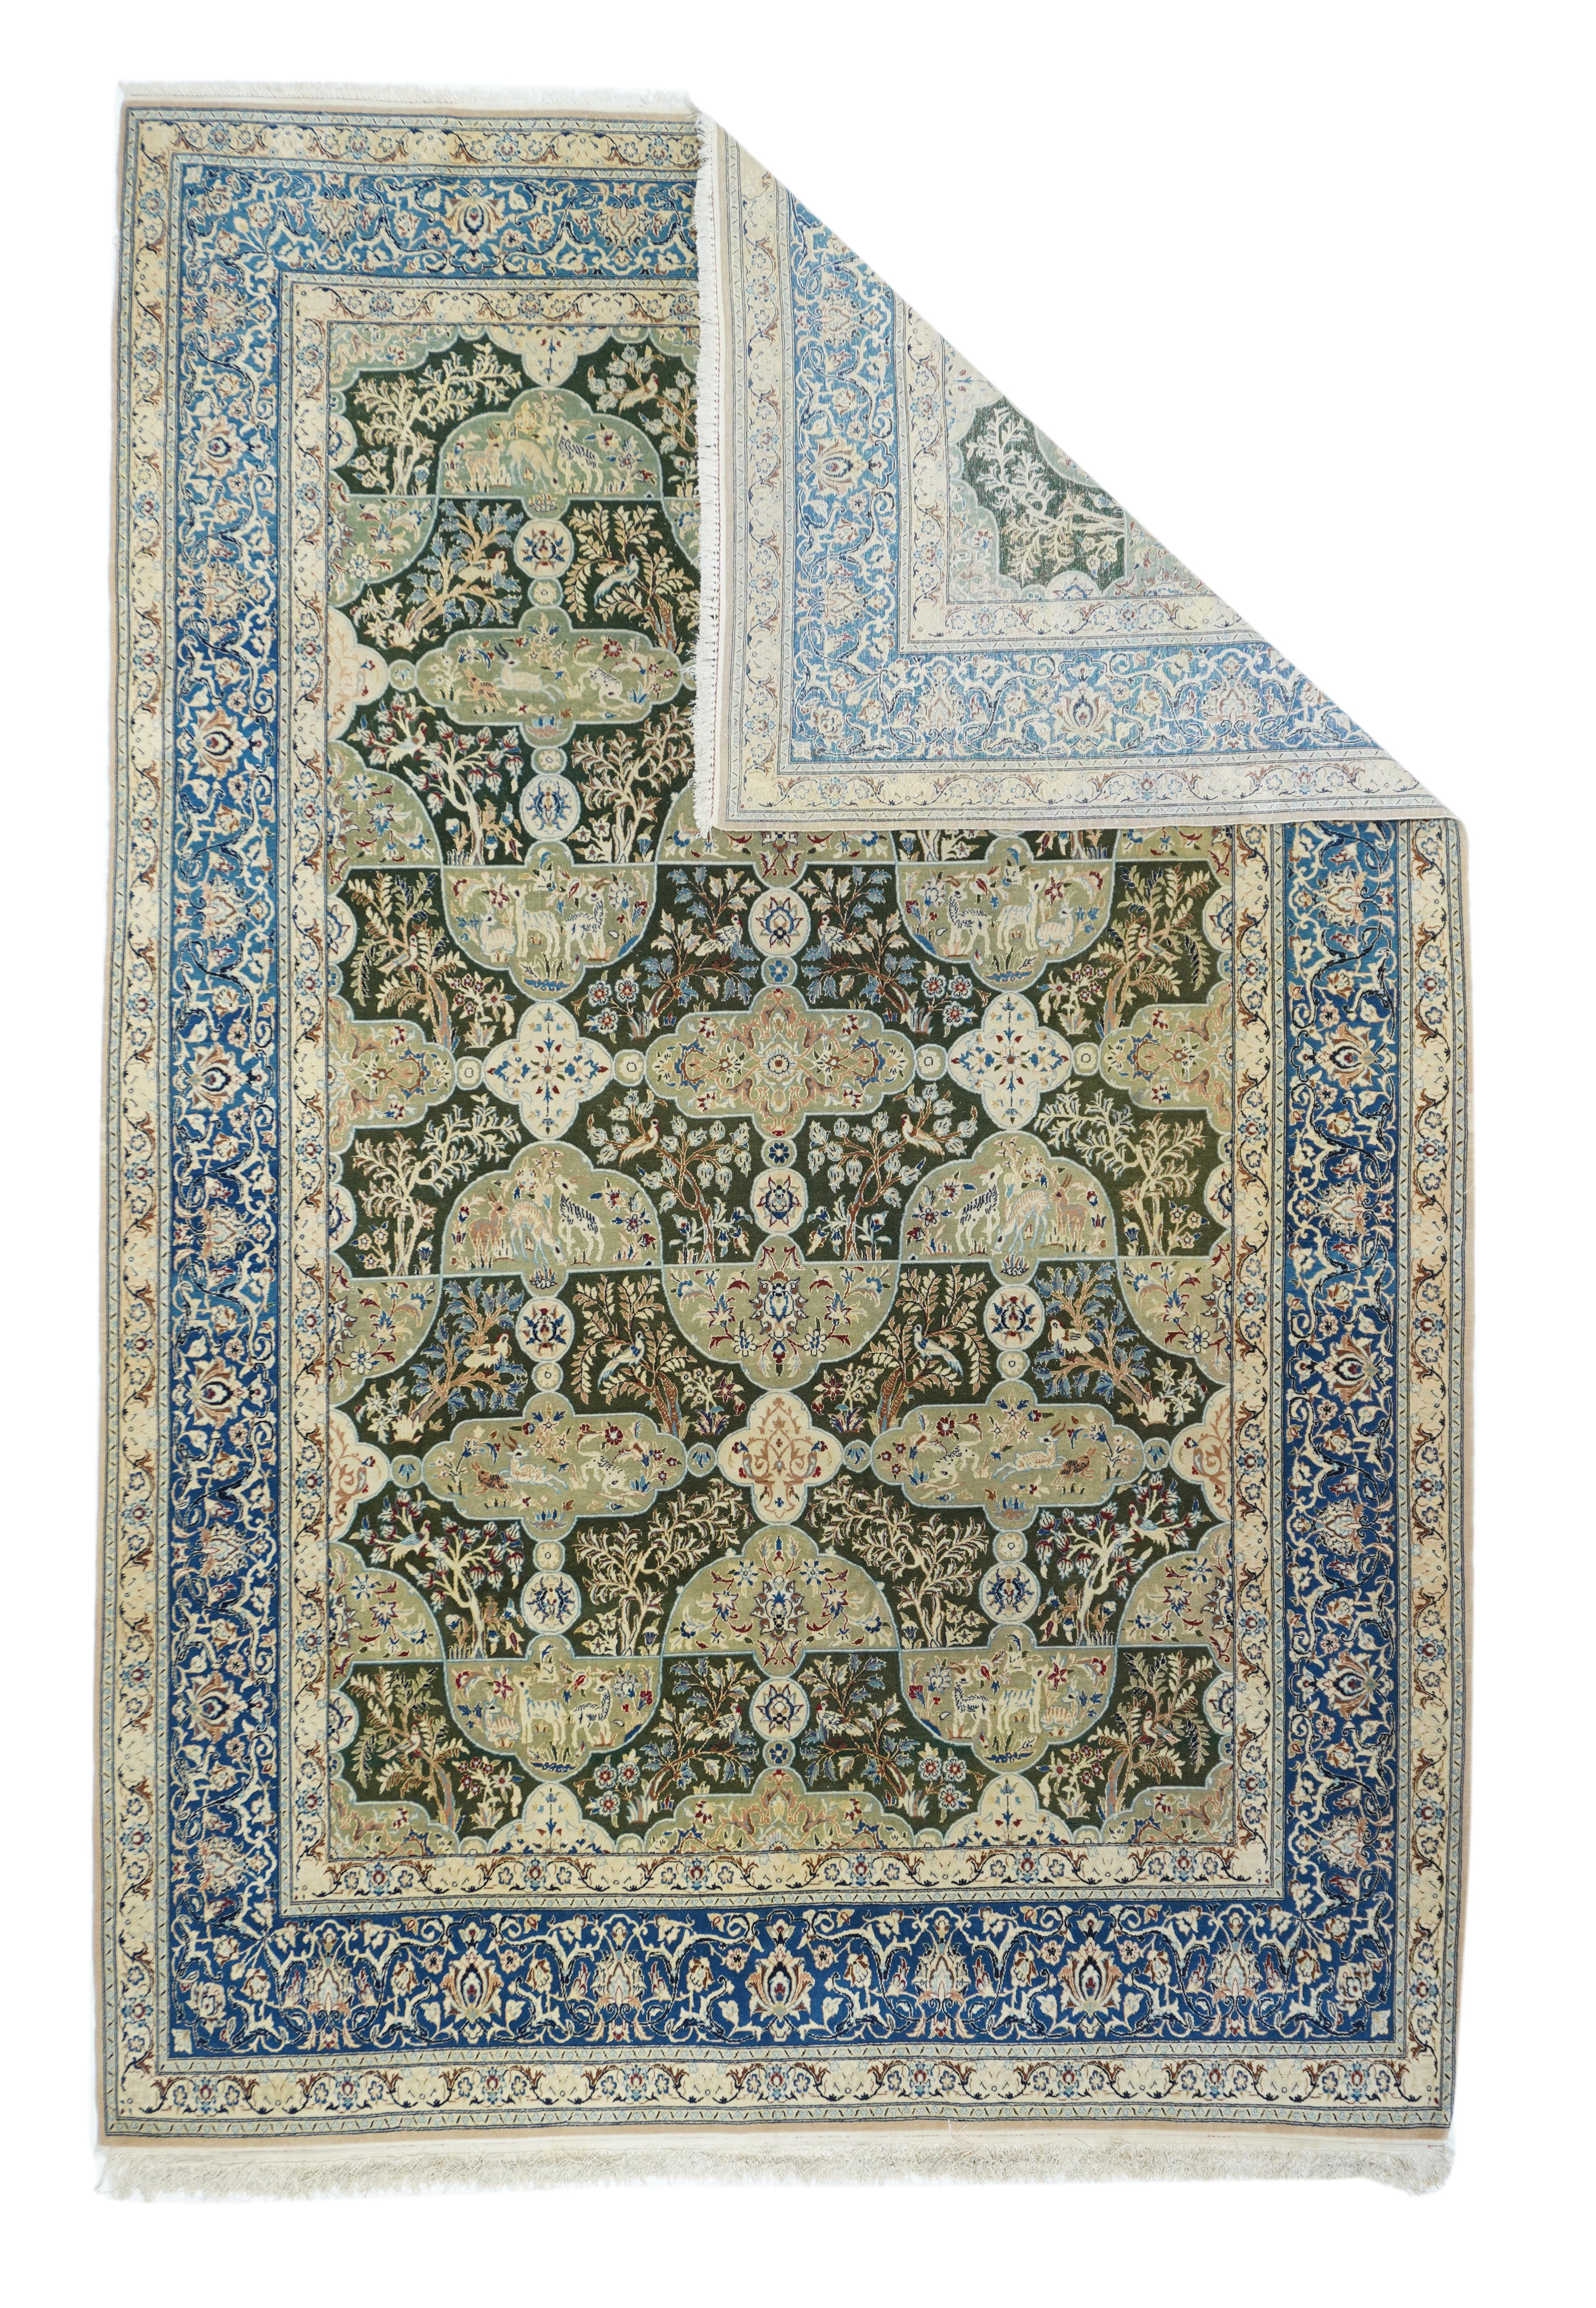 Nain rugs are constructed using the Persian knot and typically have between 300 and 700 knots per square inch. The pile is usually very high quality wool, clipped short, and silk is often used as highlighting for detail in the design.

Habibian is